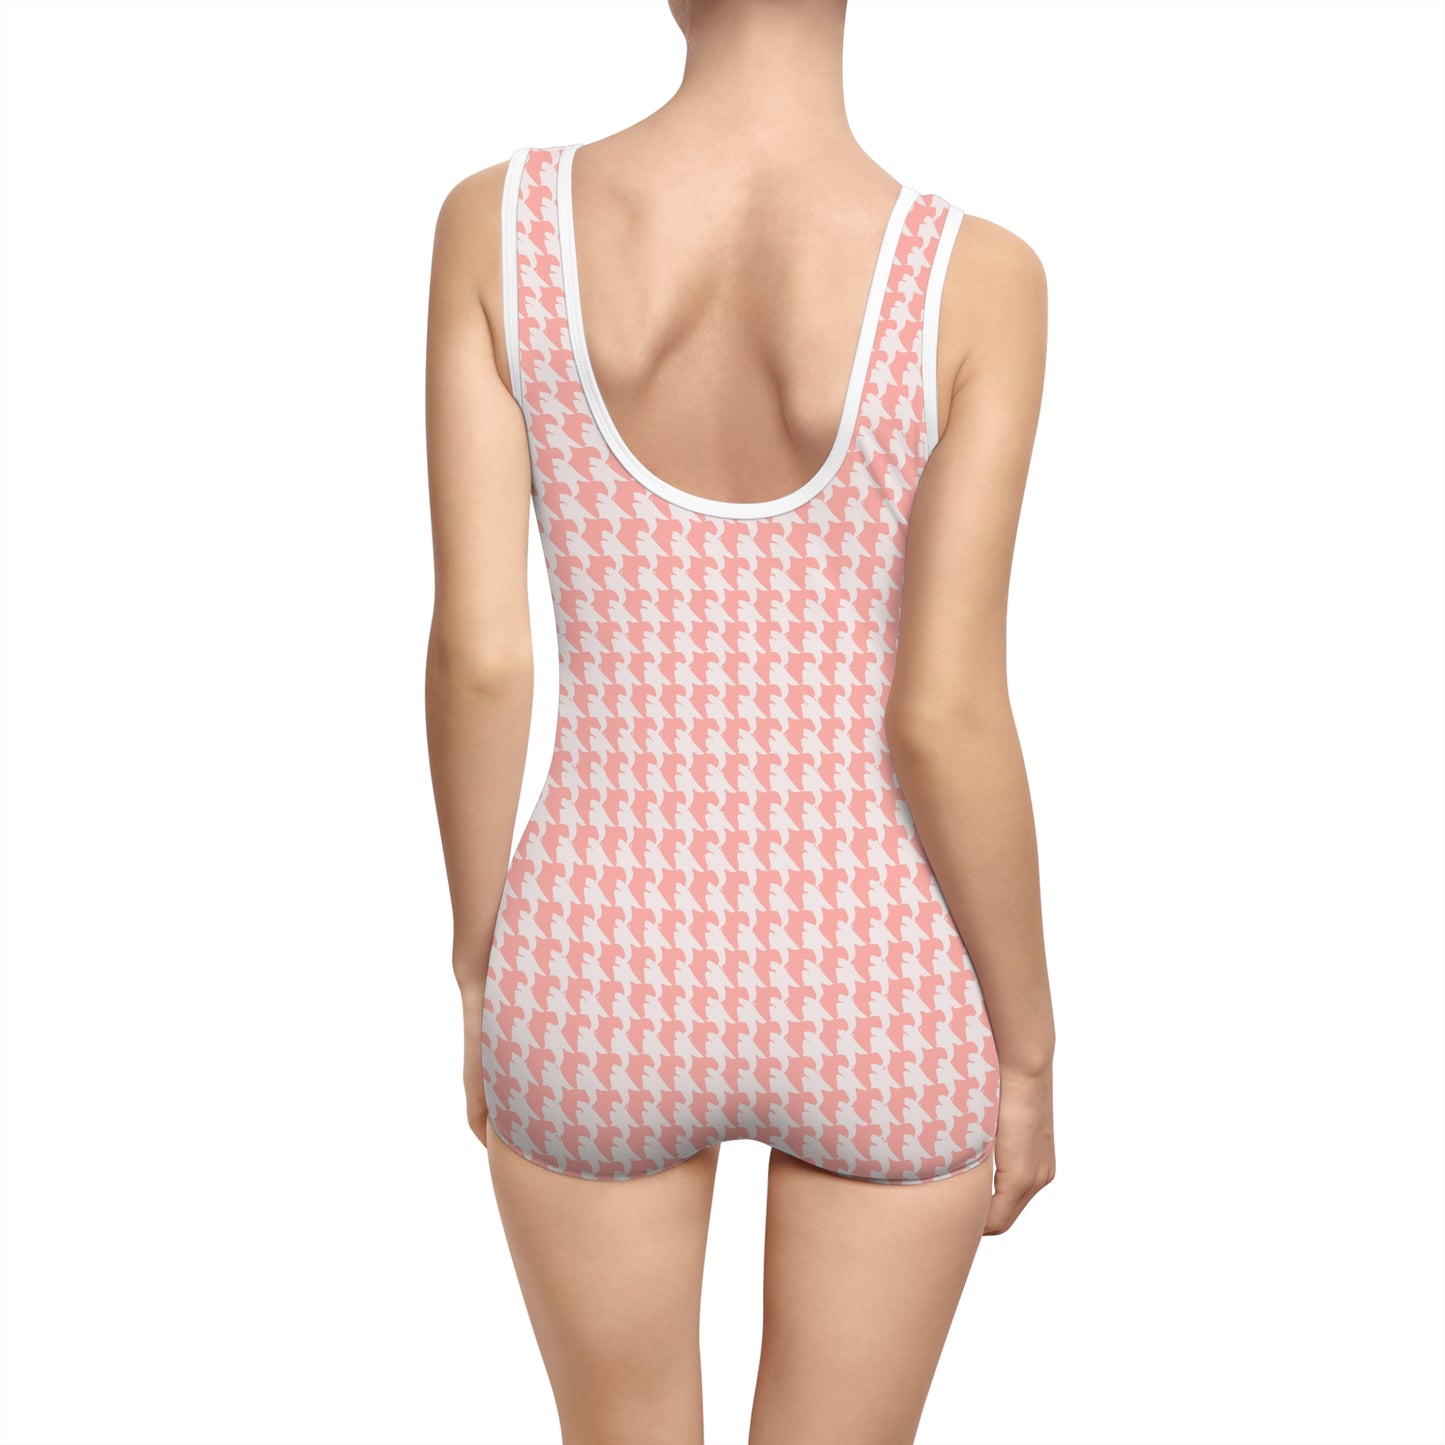 Vampire Art Coral Pink and White Houndstooth Grunge Retro Women's Vintage Swimsuit